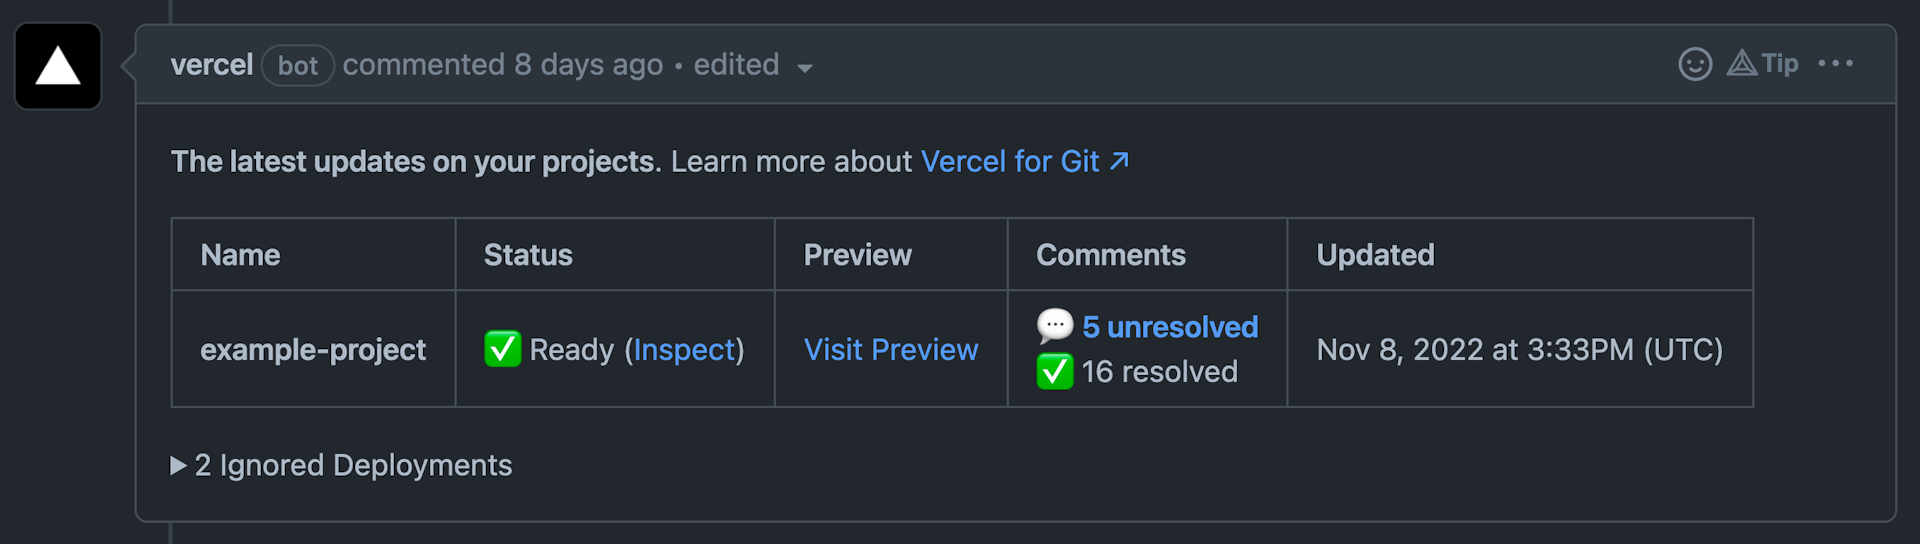 A message from Vercel bot in a GitHub PR.